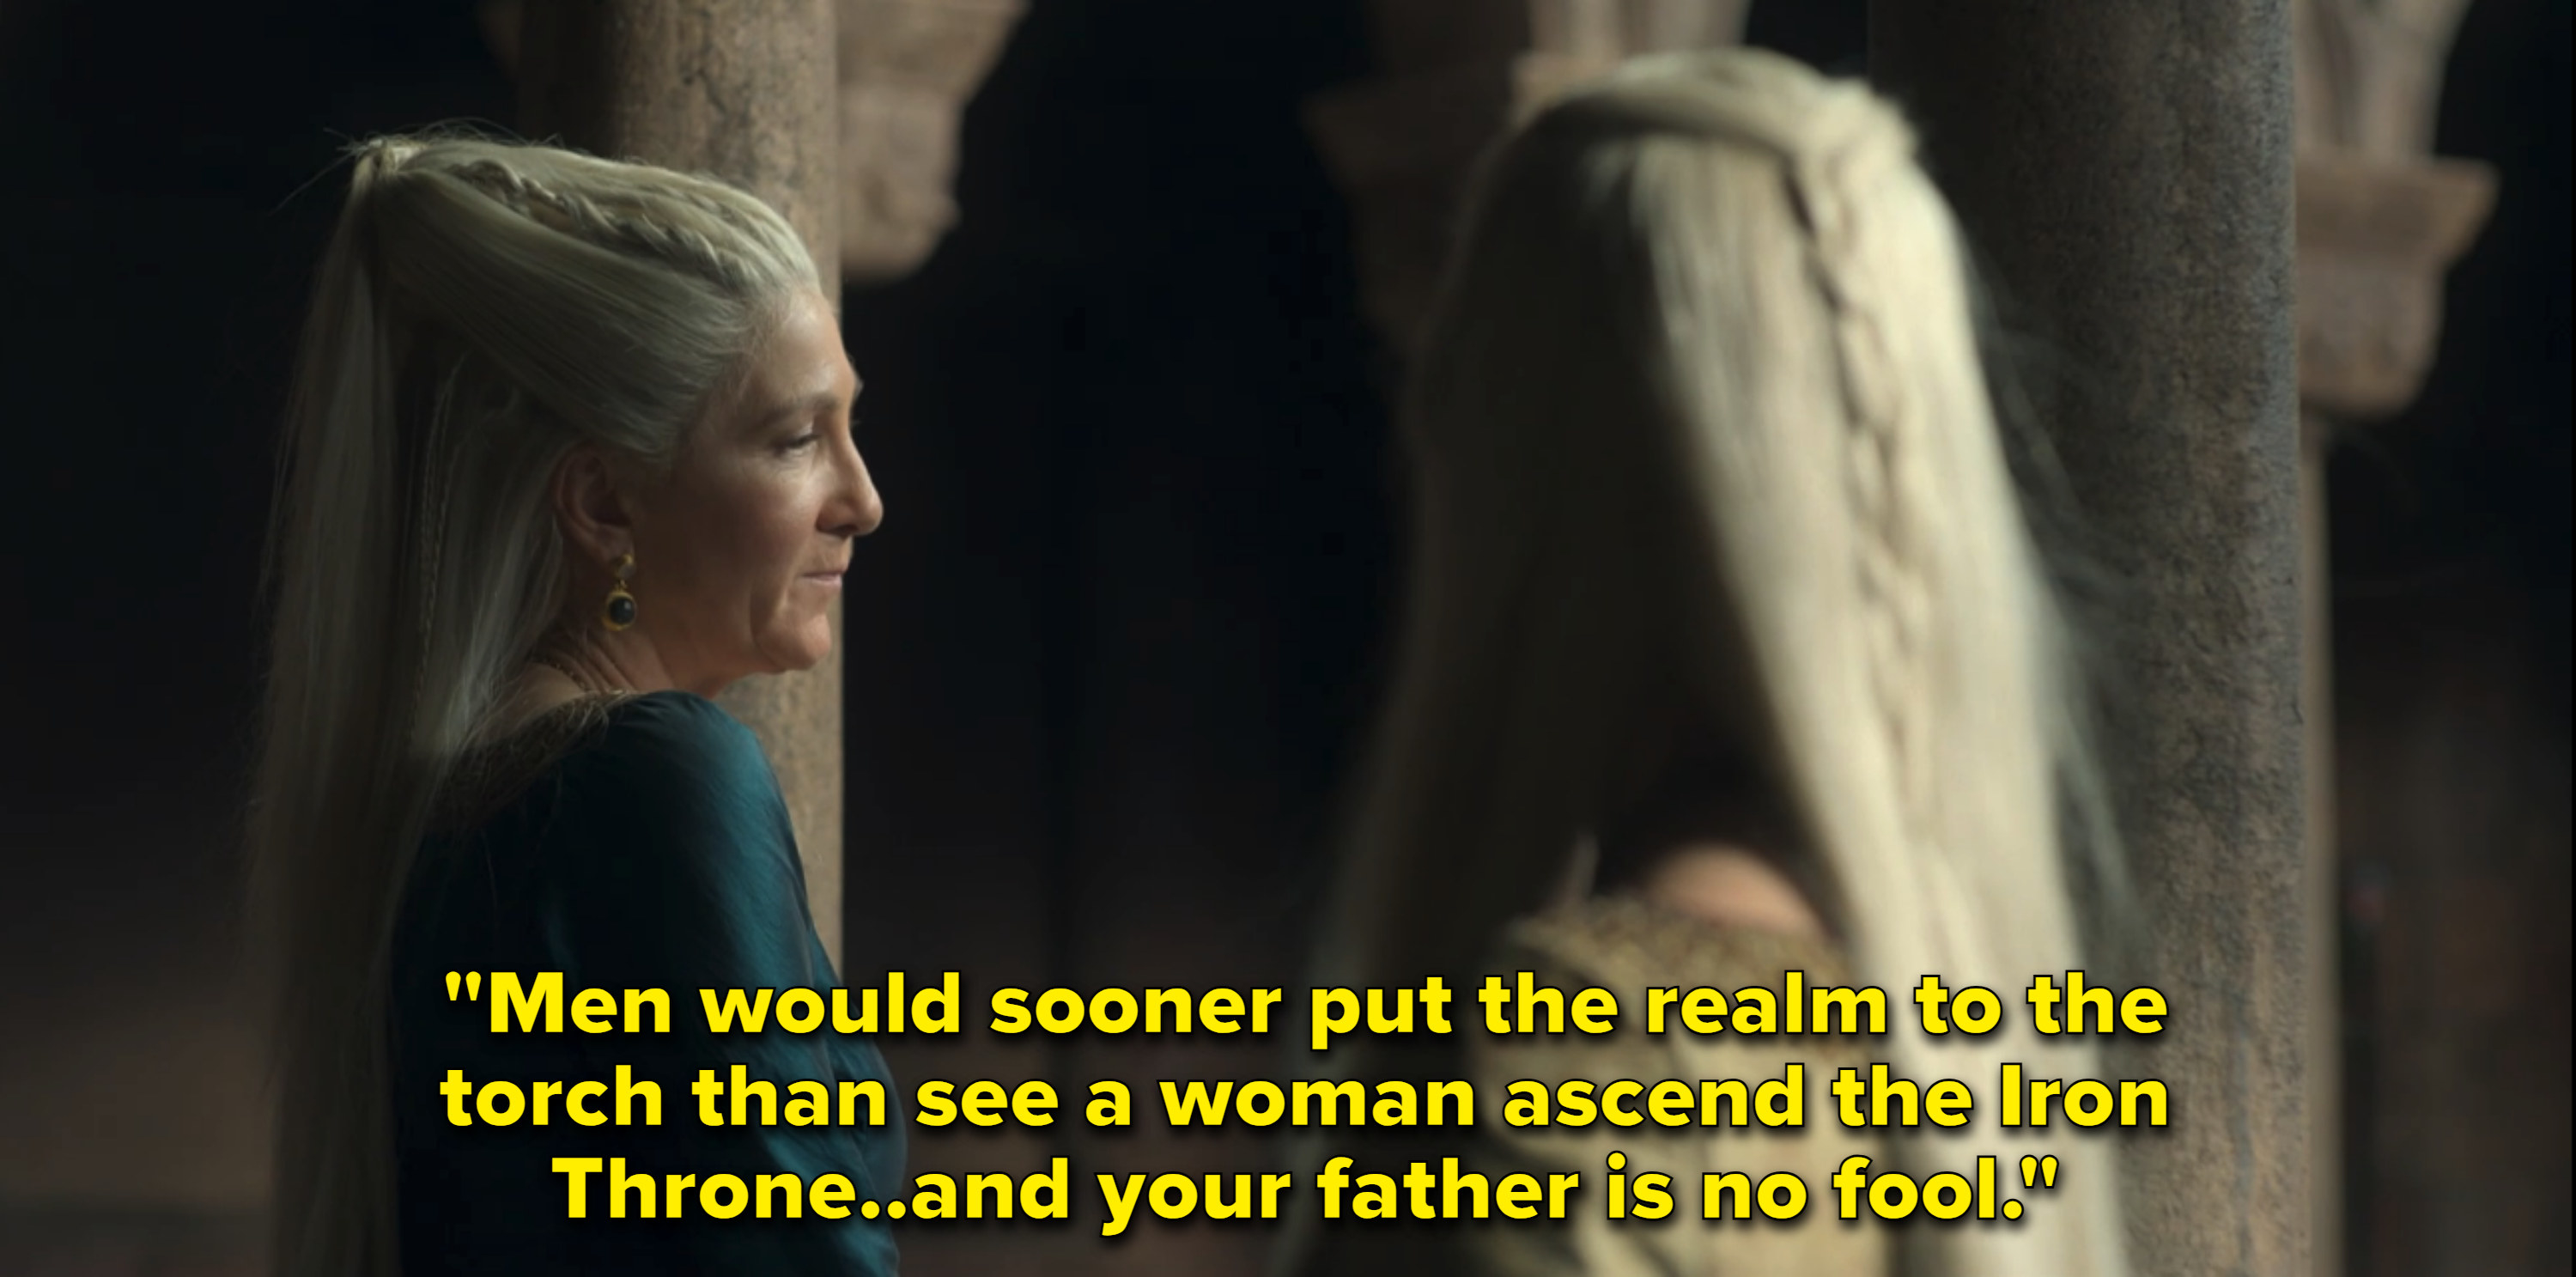 Princess Rhaenys saying &quot;Men would sooner put the realm to the torch than see a woman ascend the Iron Throne...and your father is no fool&quot;